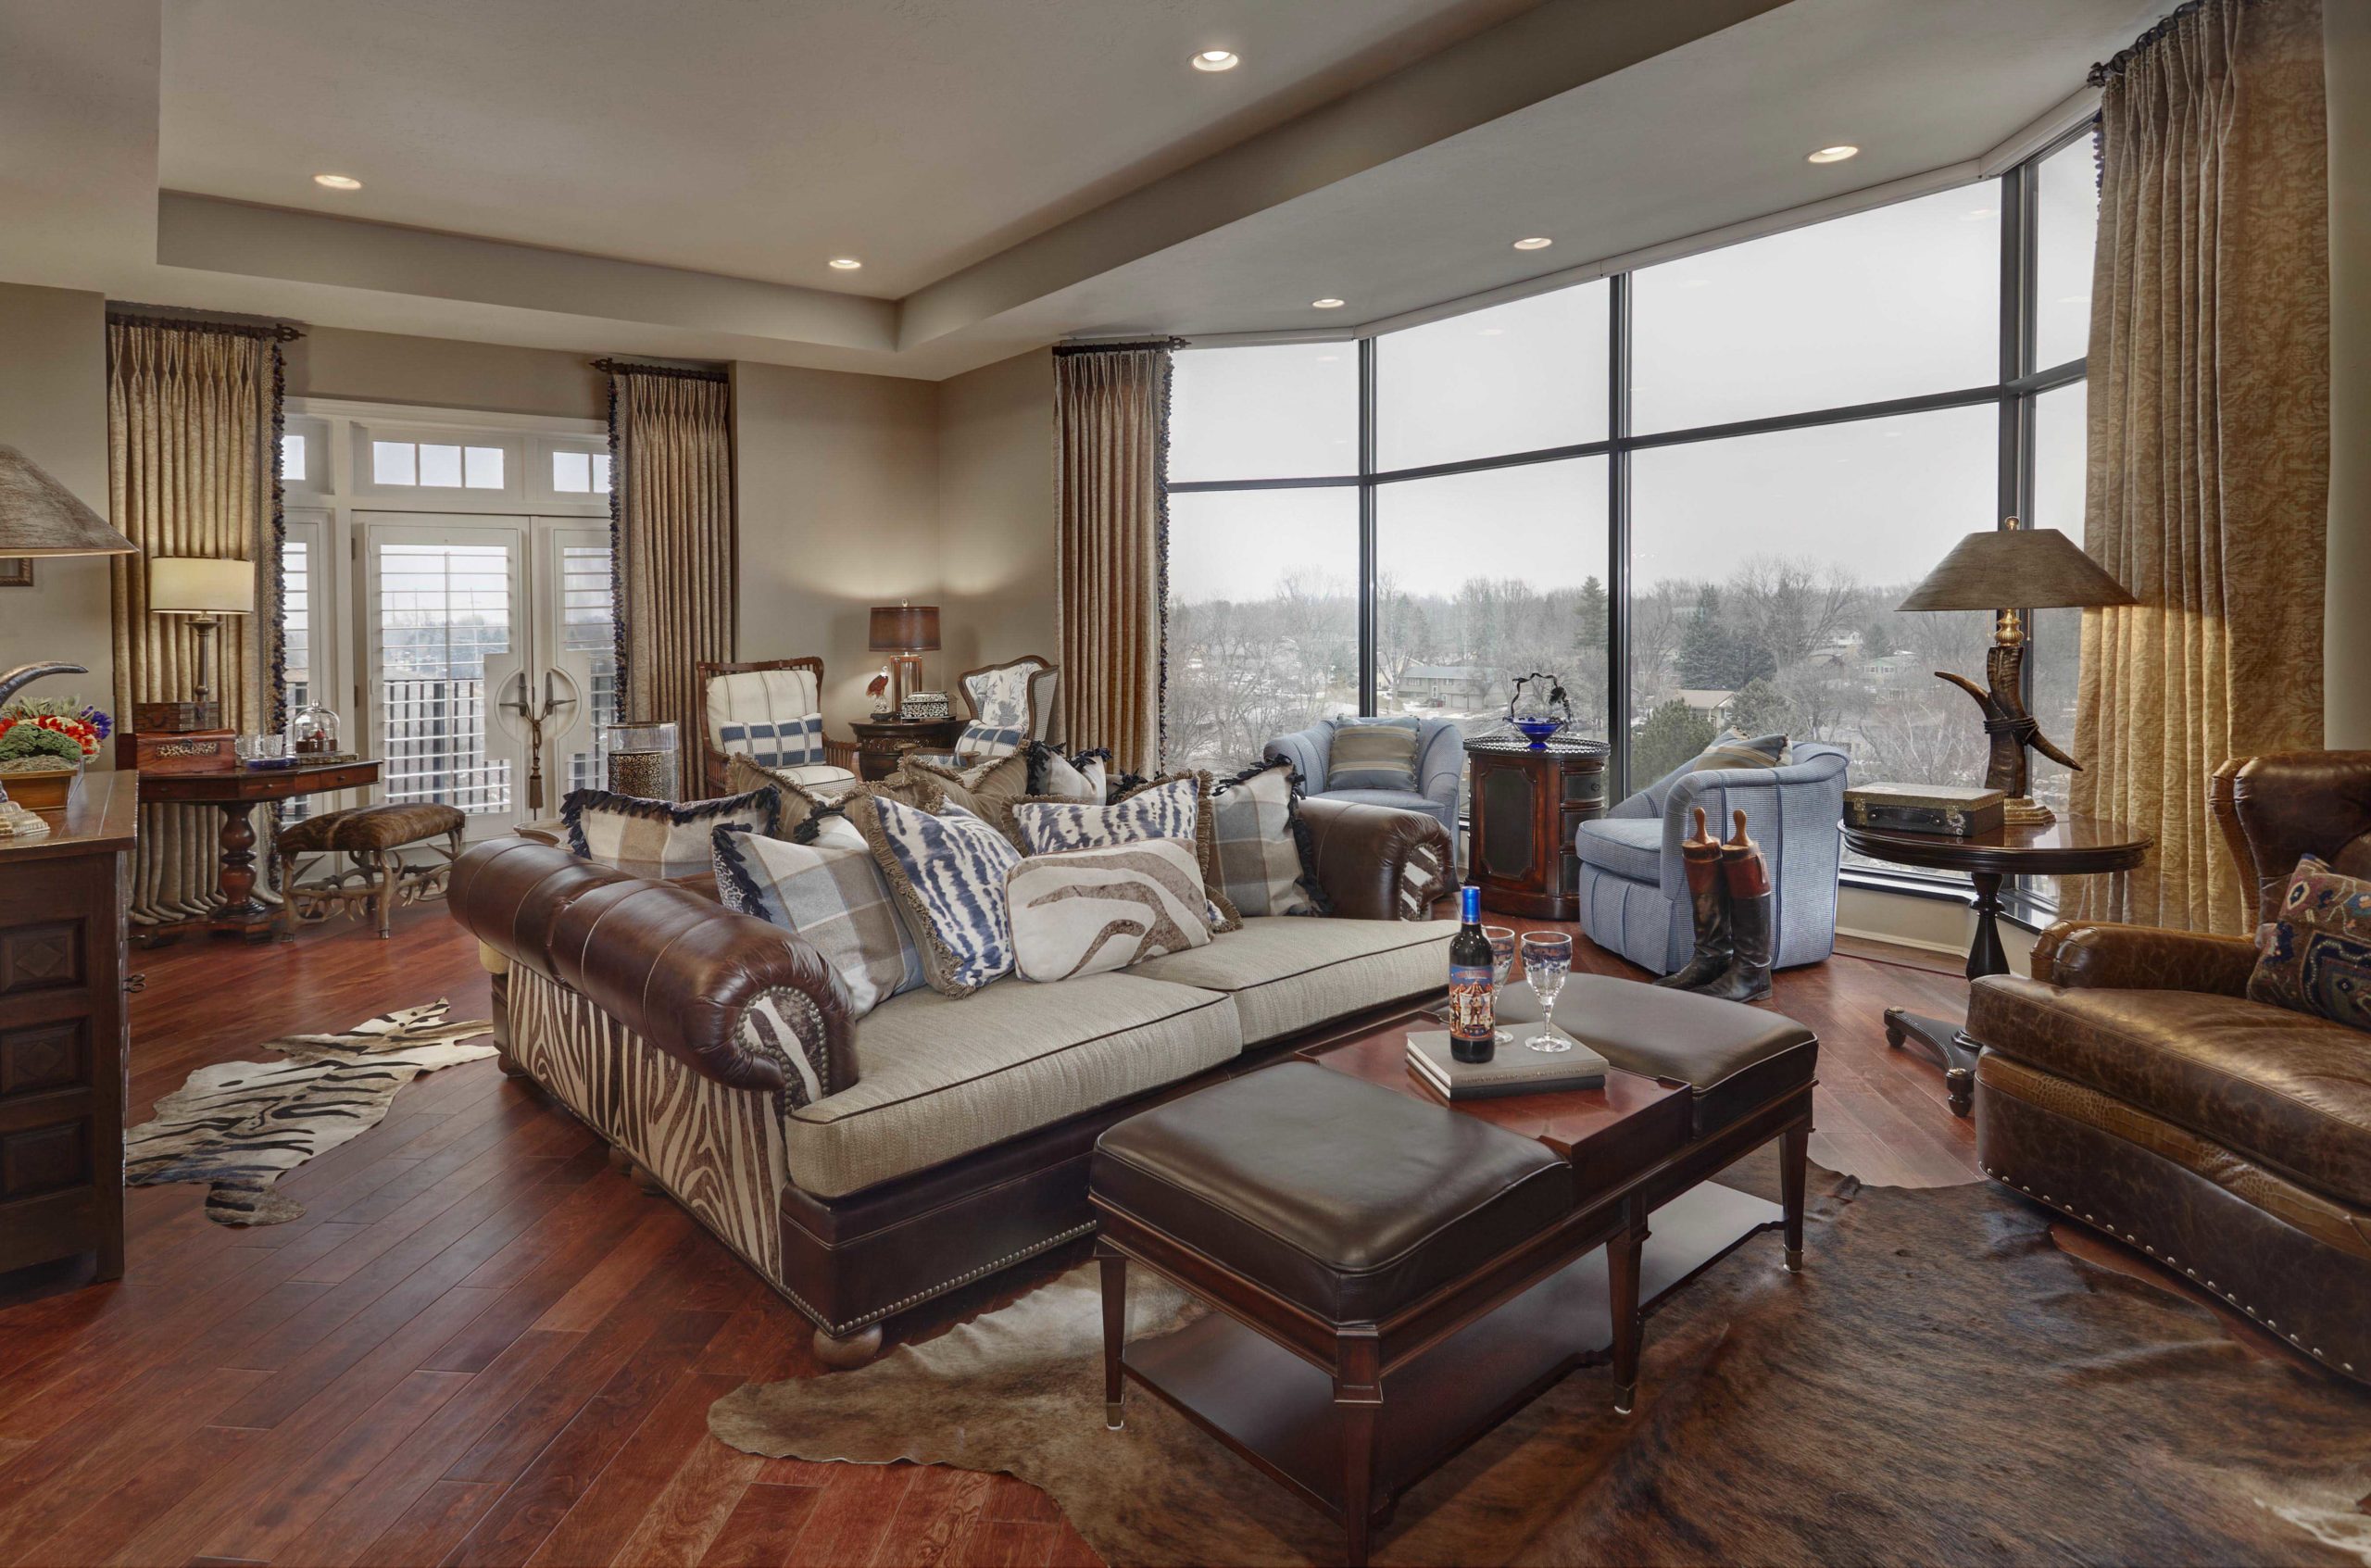 Large living room with dark wooden floors and animal print accents